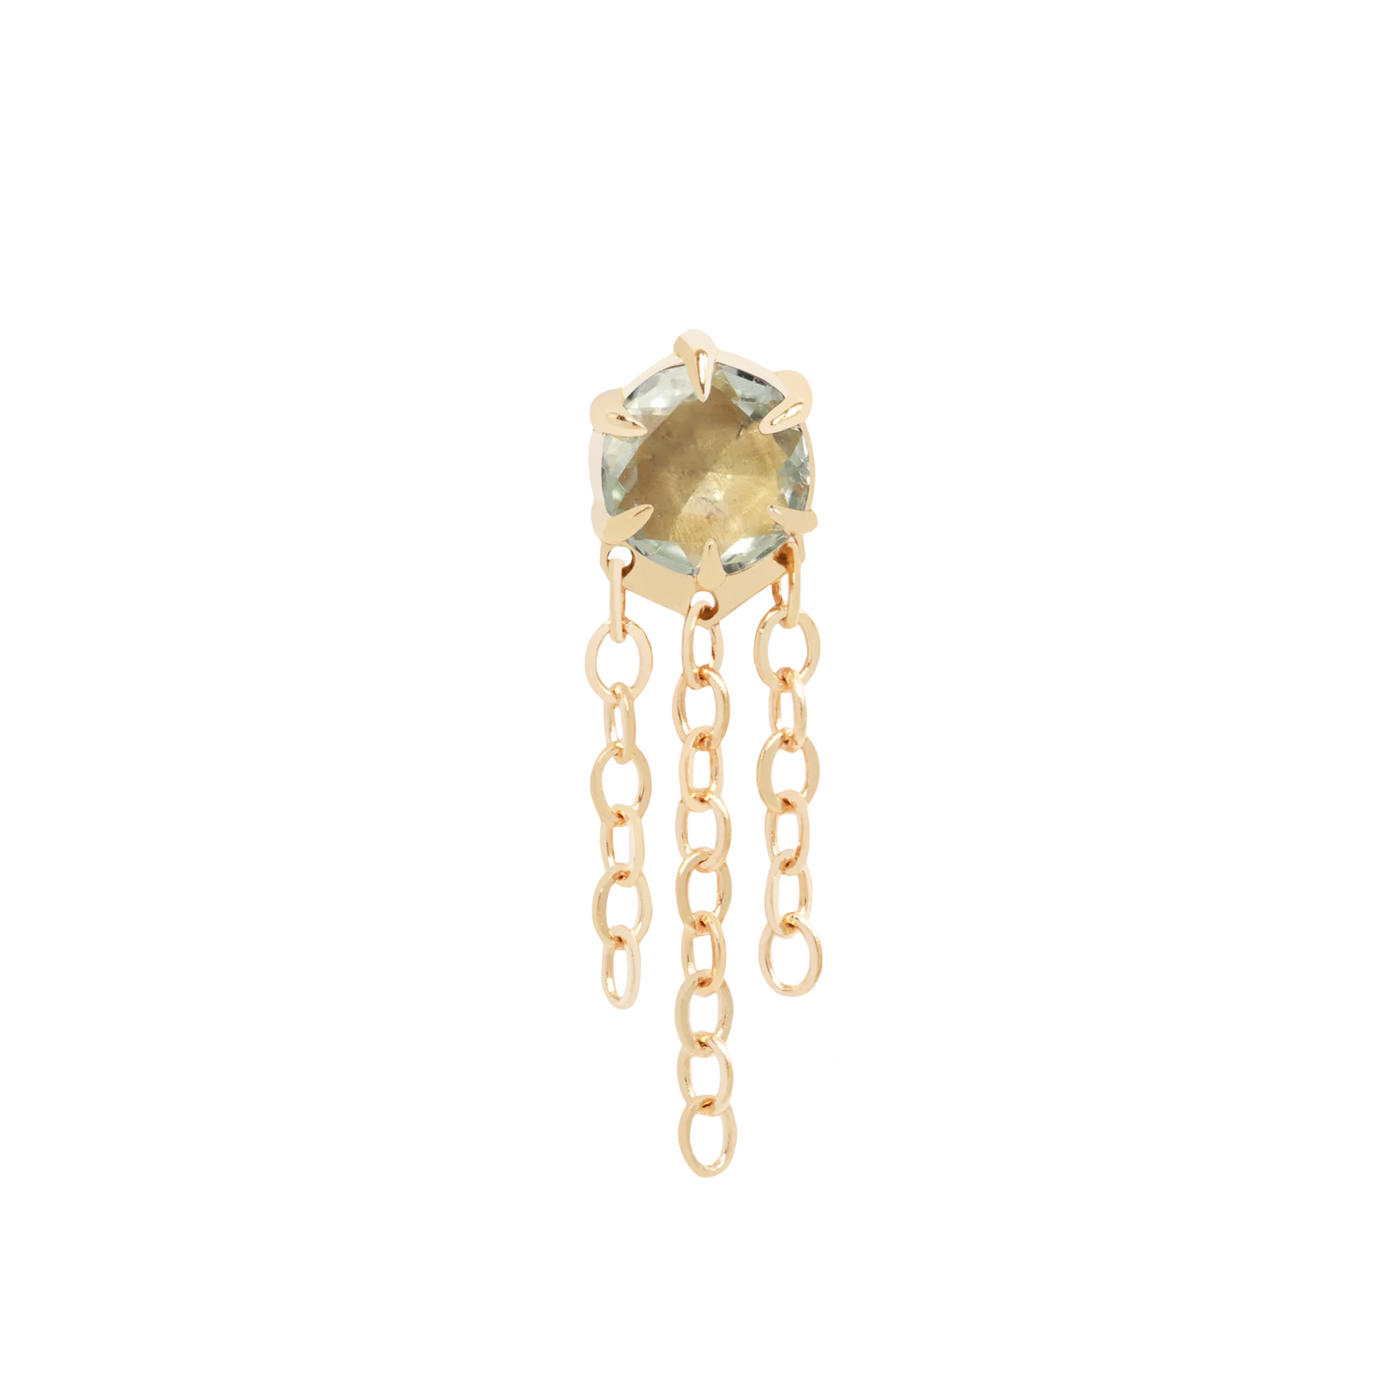 threadless: "Illuminate Small with Chains" End in Gold with Genuine Gemstone